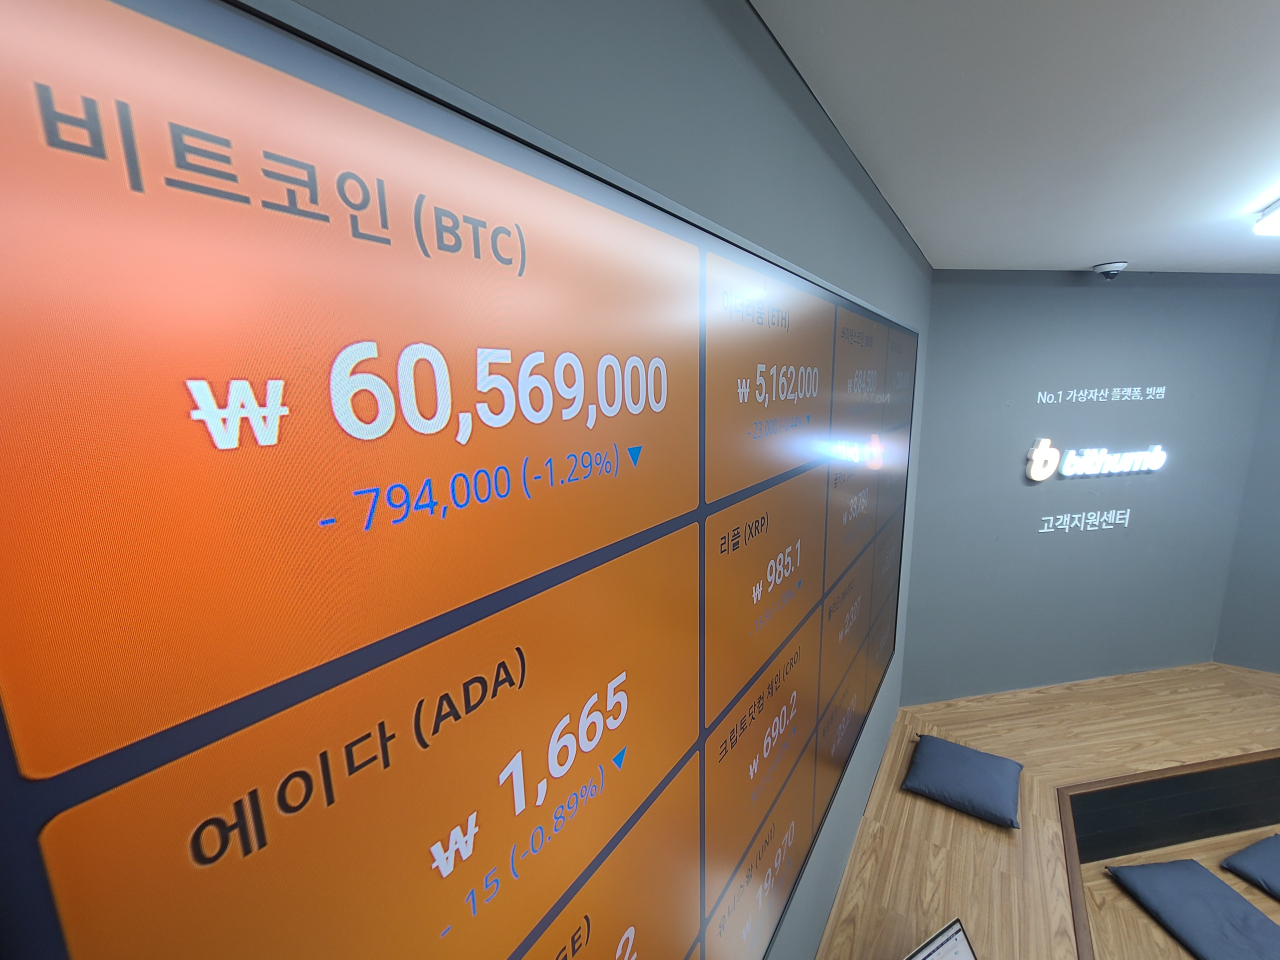 An electric board shows prices of Bitcoin on Dec. 6 at the customer service center of Bithumb, one of S. Korea's largest cryptocurrency exchanges. (Yonhap)